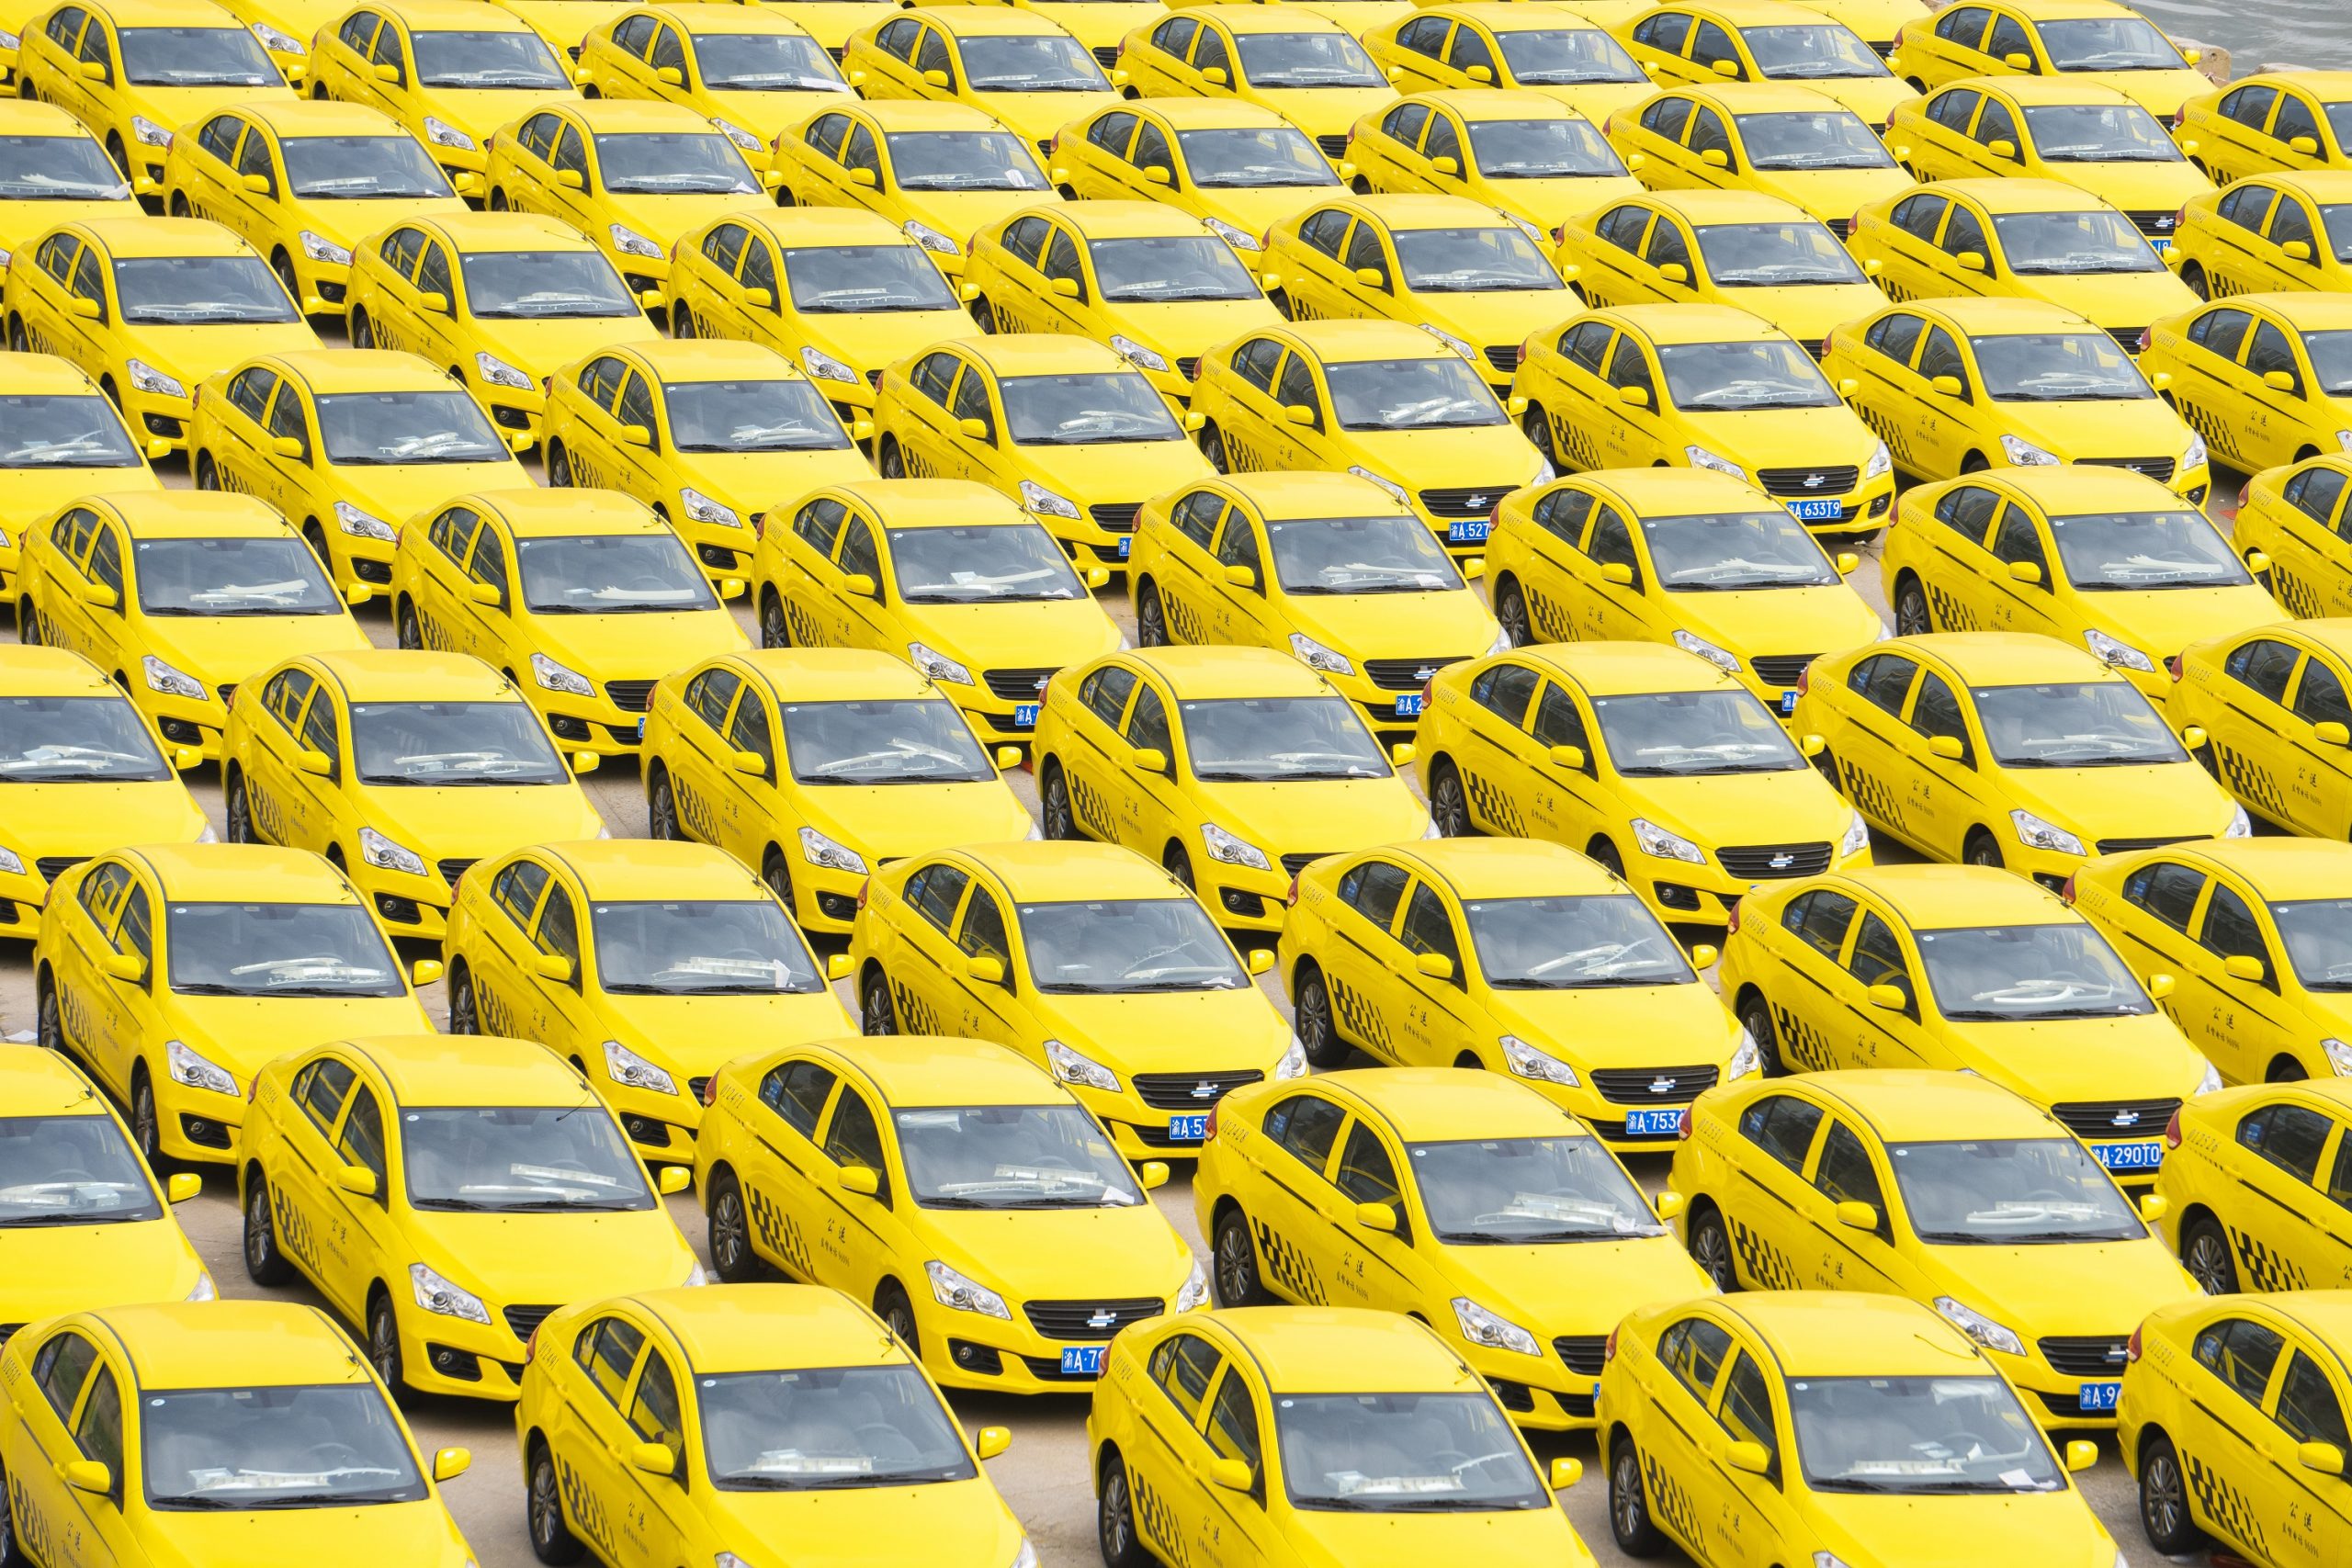 A fleet of yellow cars on a lot